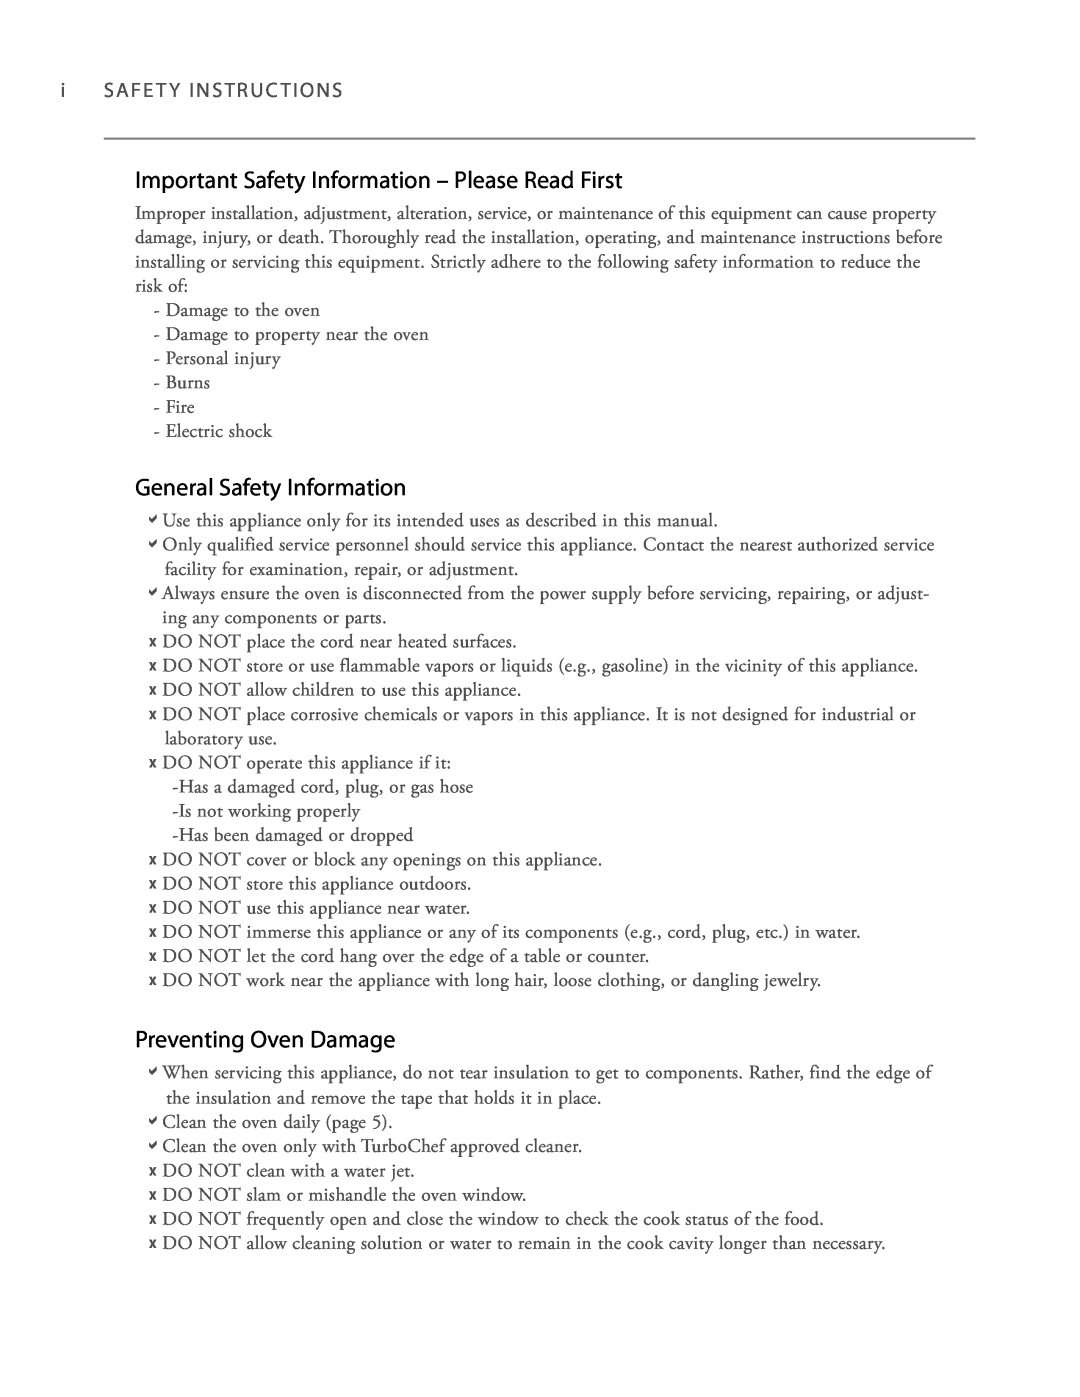 Turbo Chef Technologies 3240 manual Important Safety Information - Please Read First, General Safety Information 